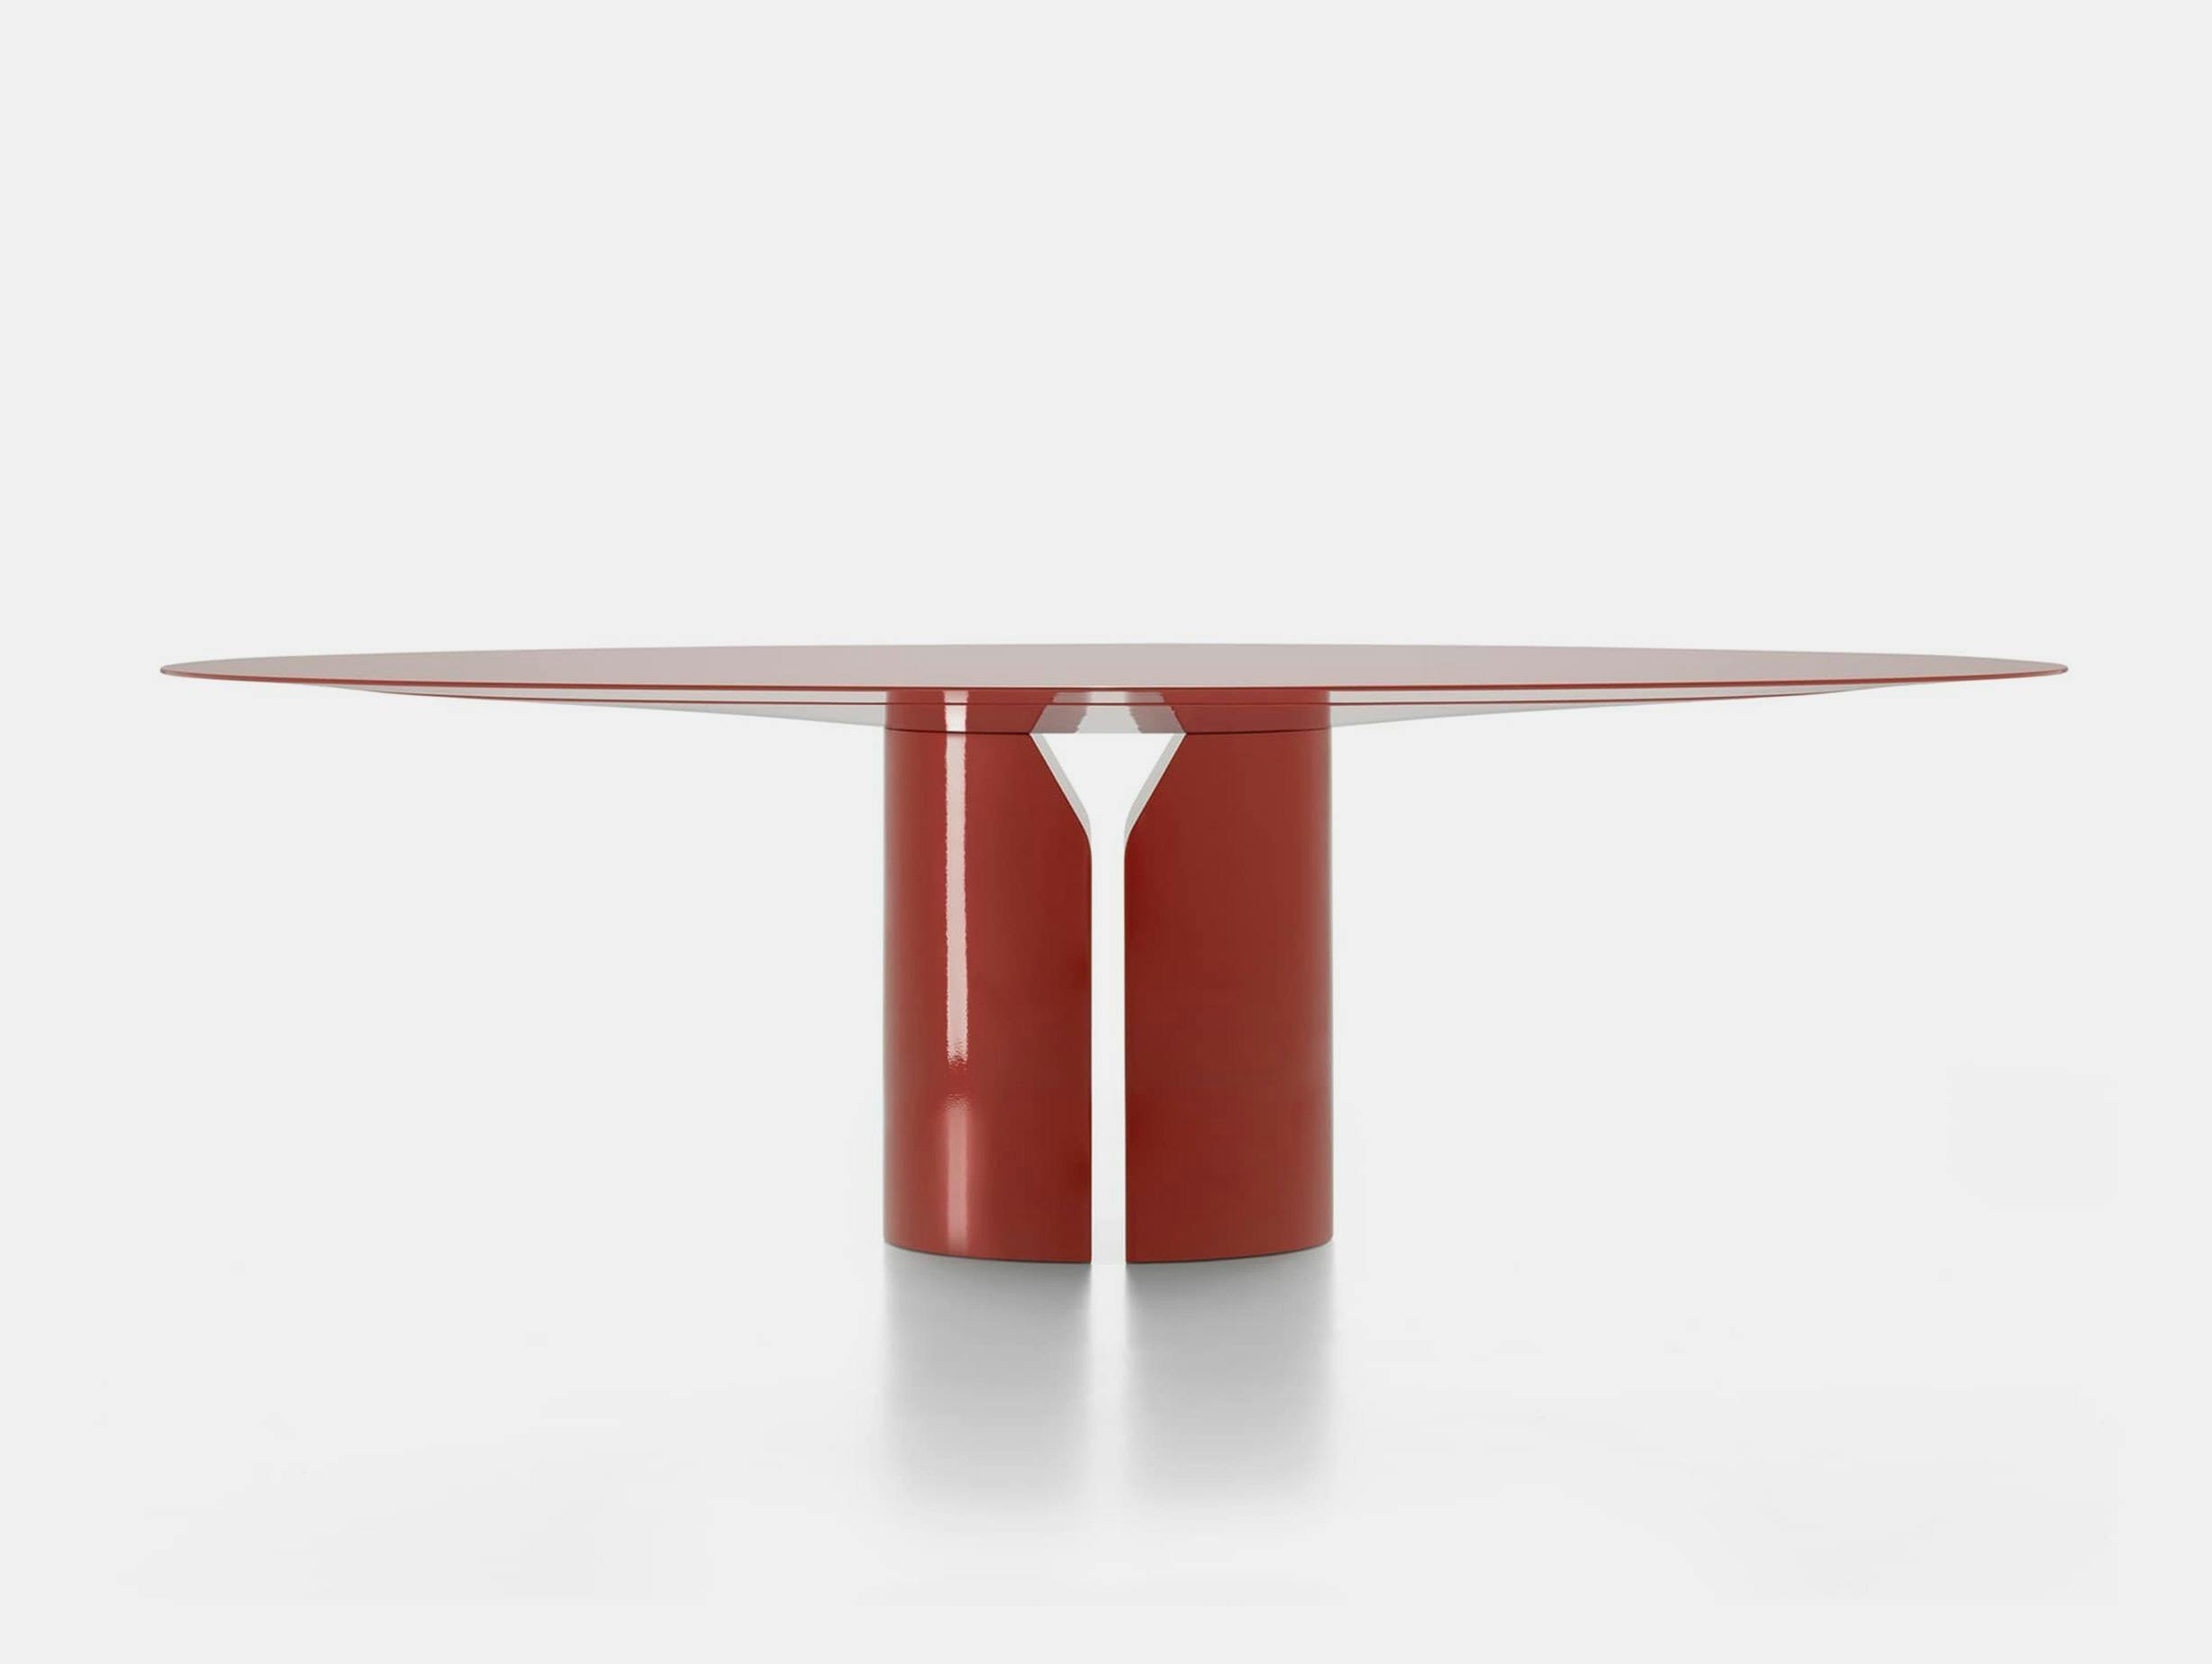 Mdf italia Jean Nouvel Design ndf table oval gloss coral red